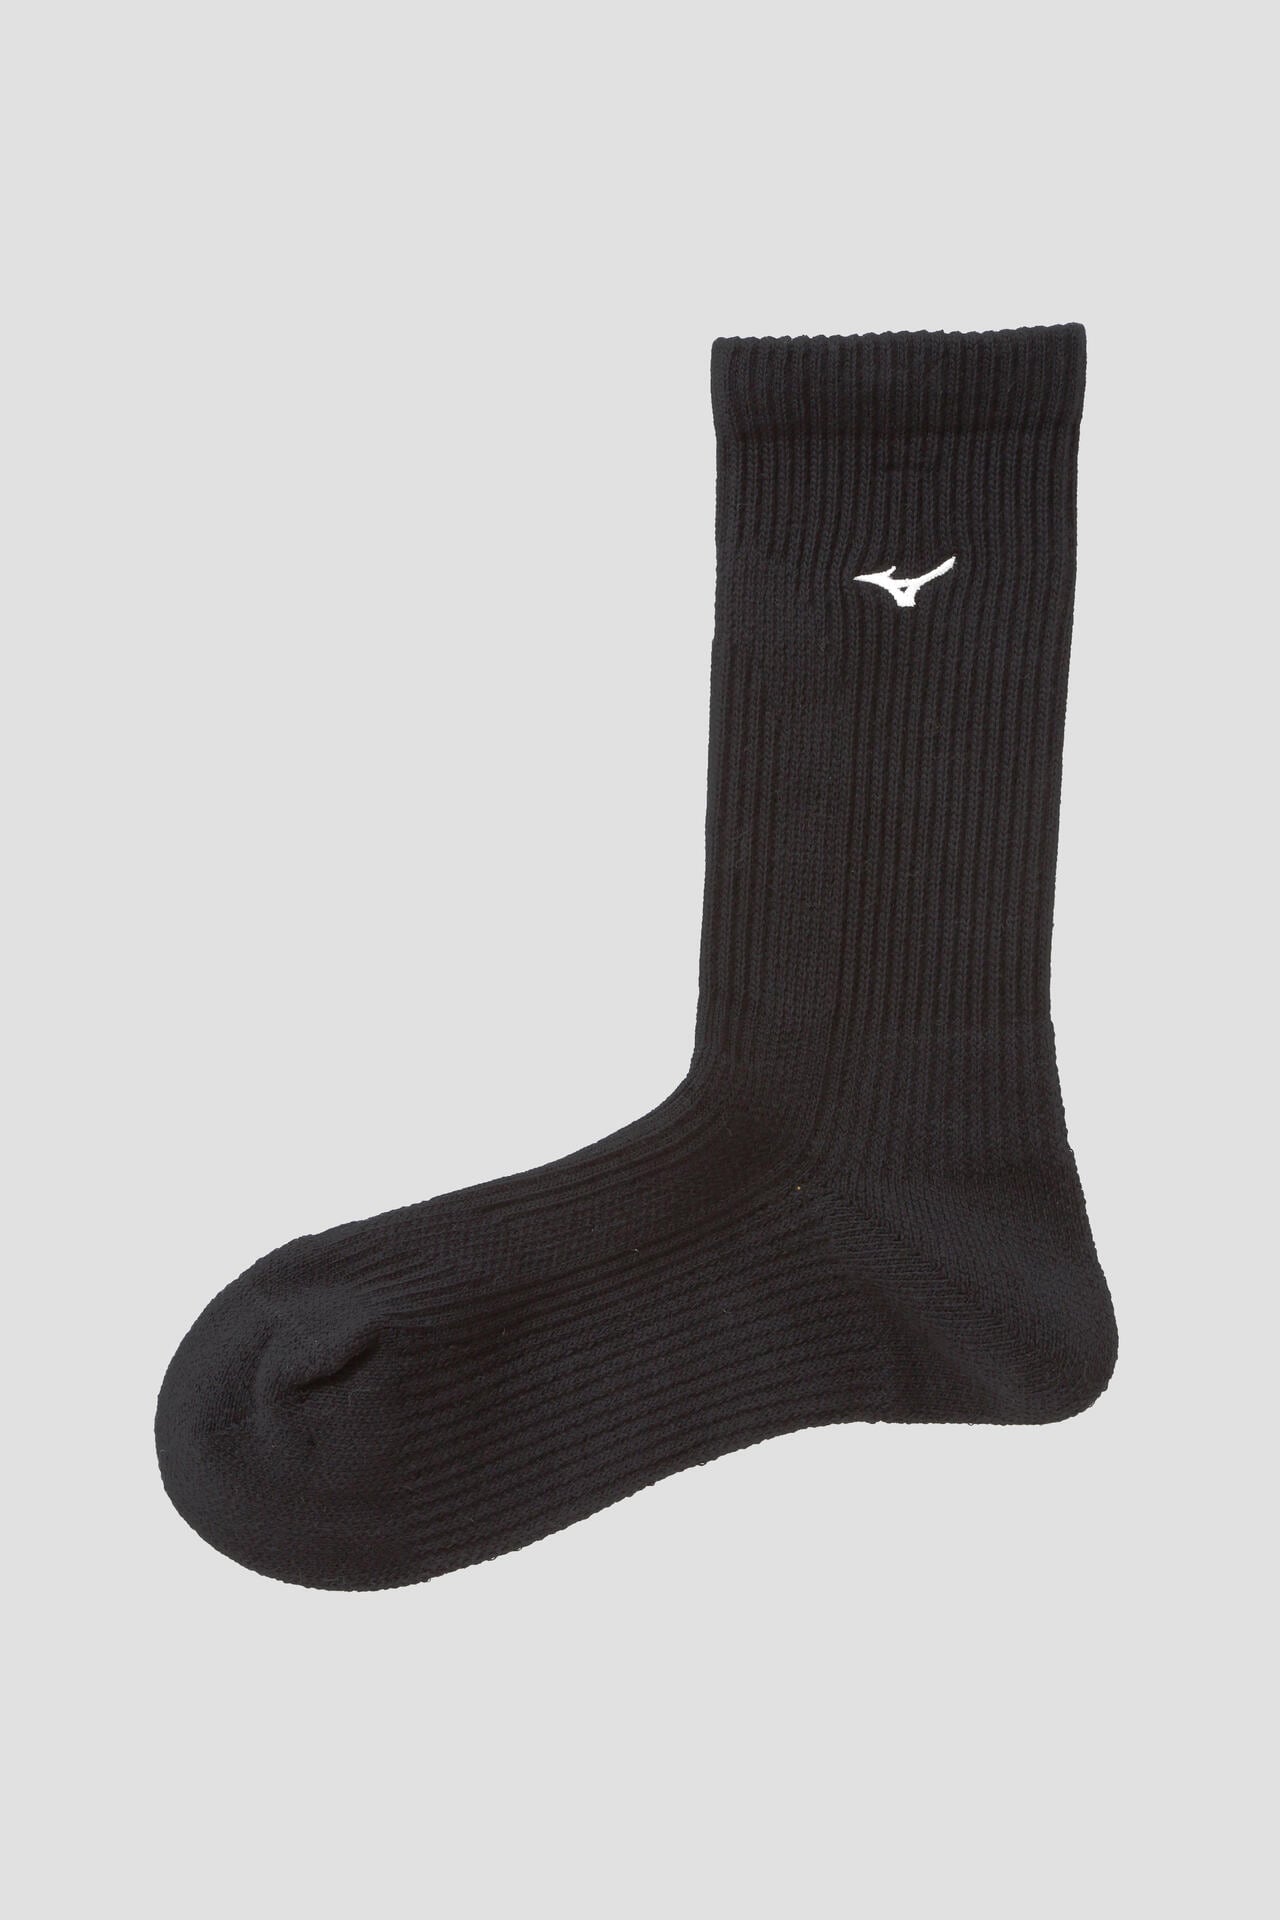 FIT SUPPORT SOCKS5